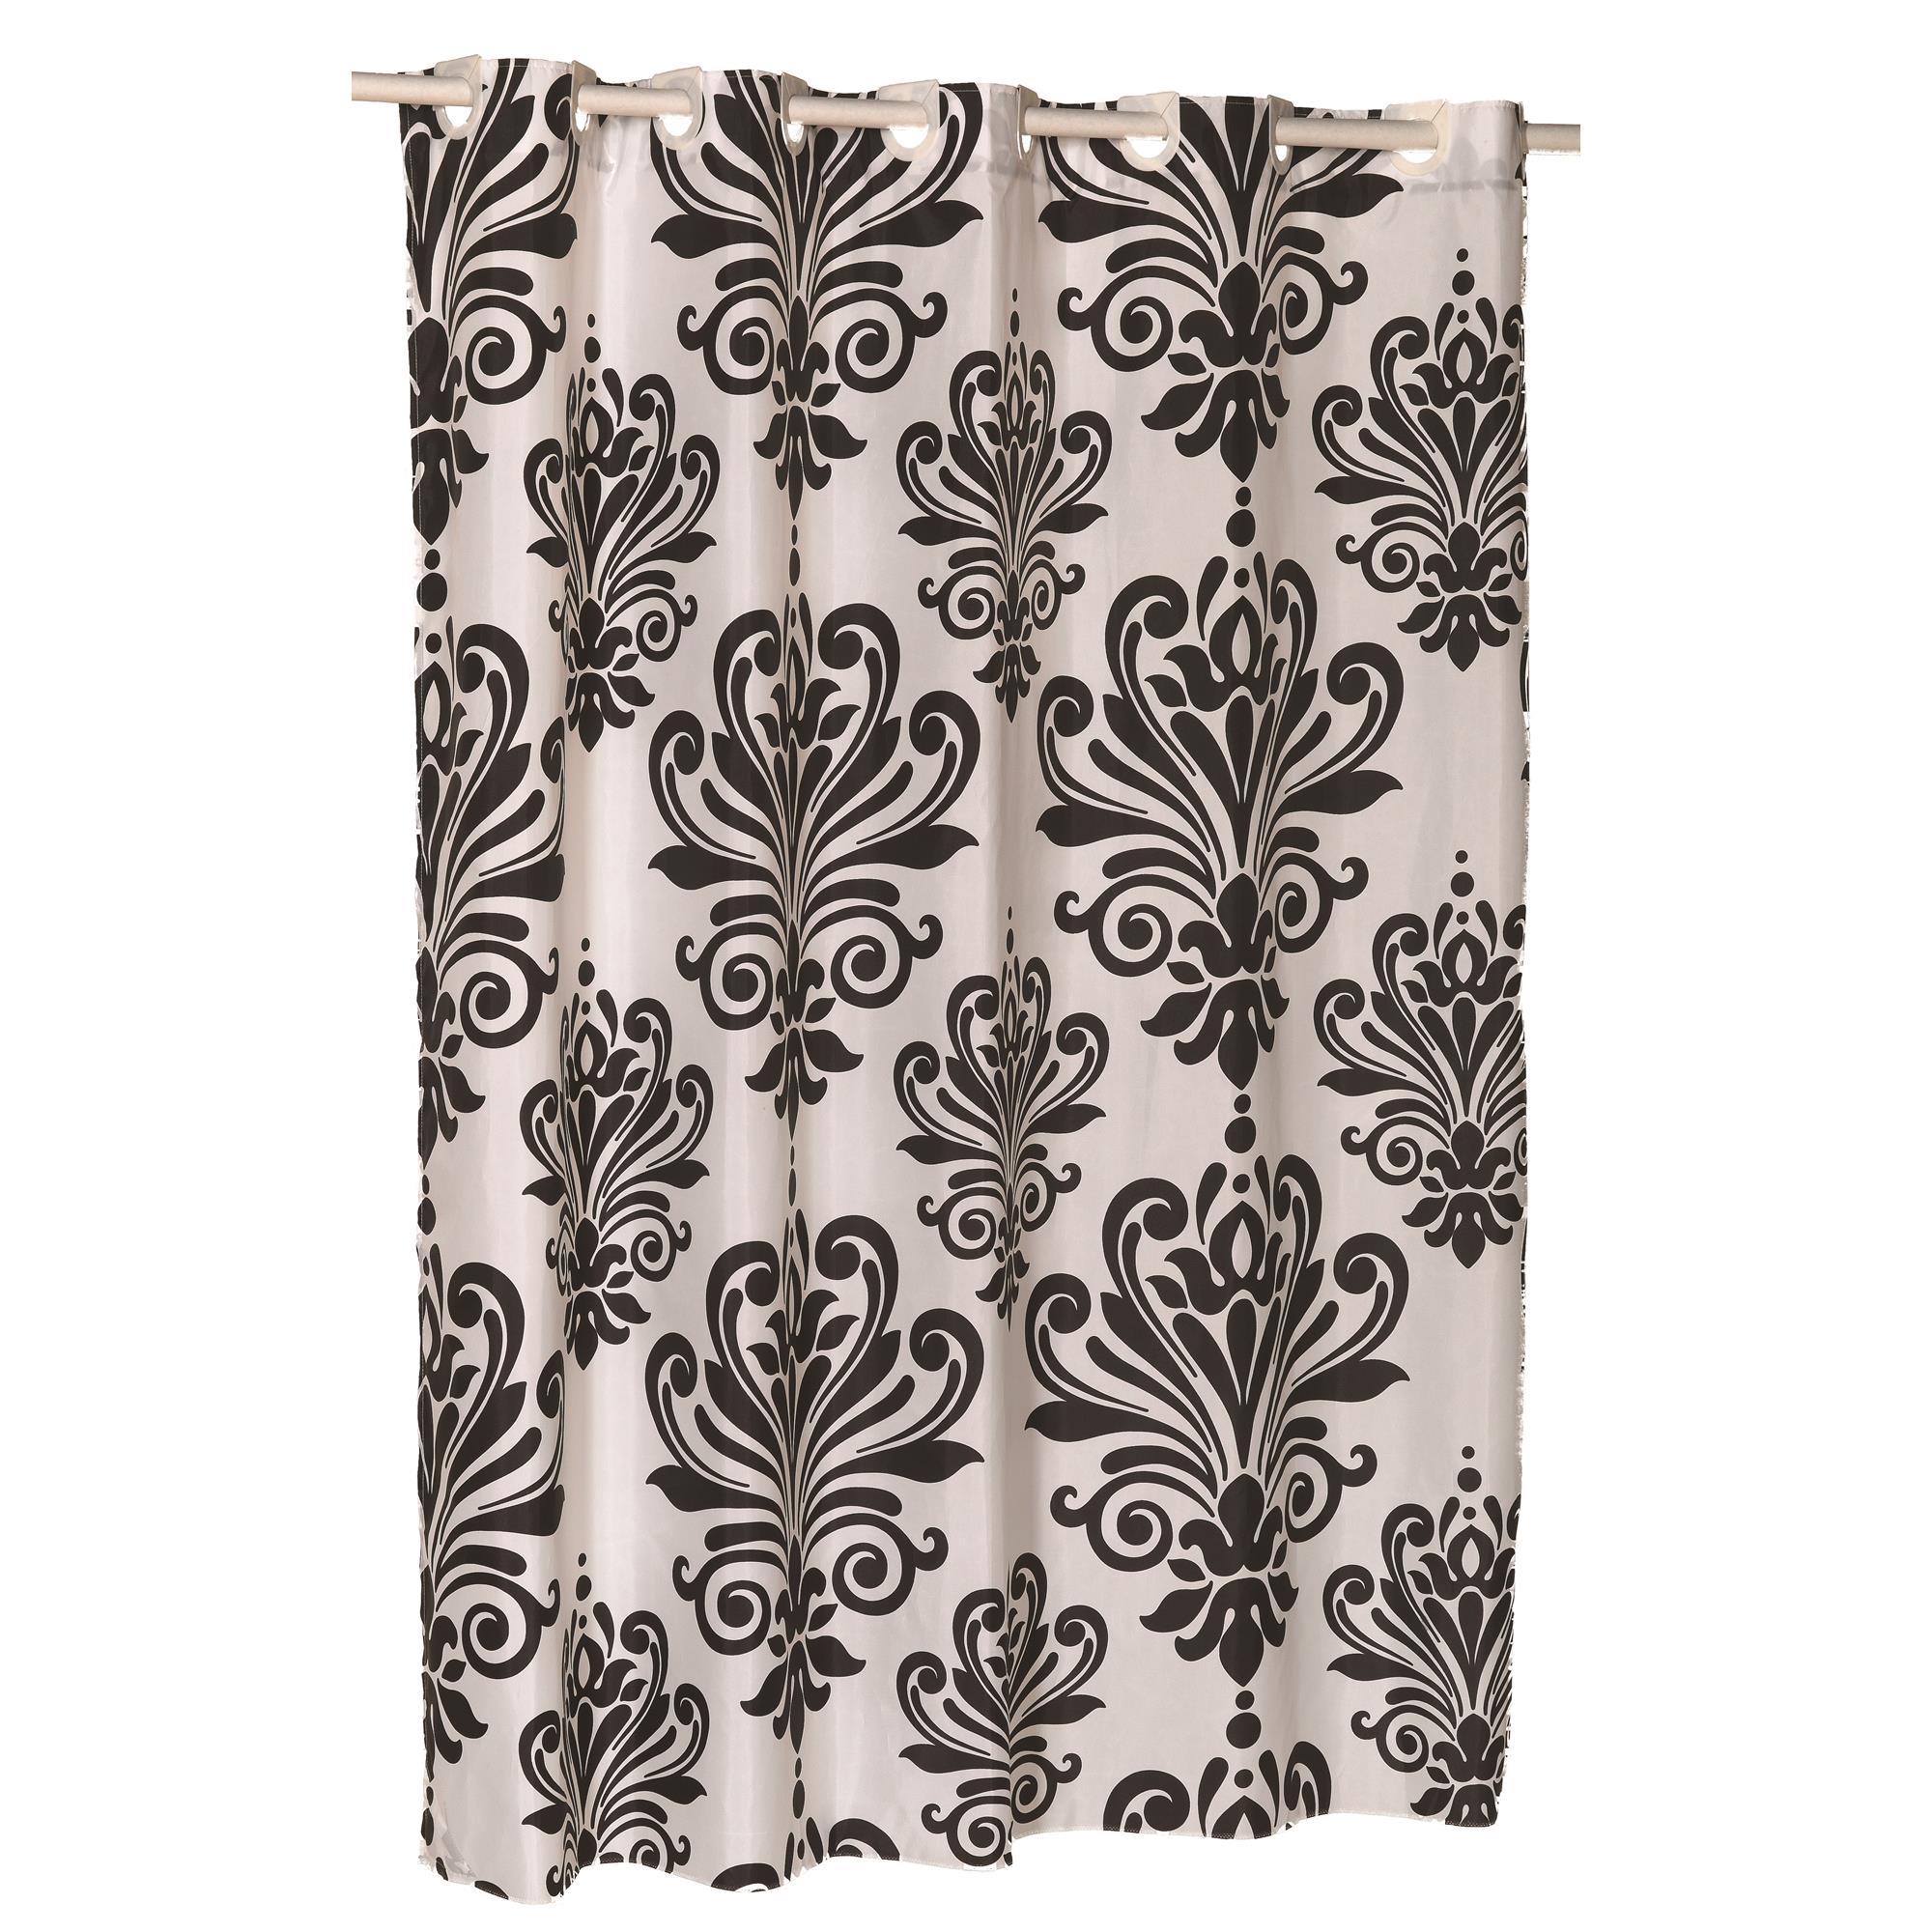 Polyester Shower Curtain, Ez On Shower Curtain